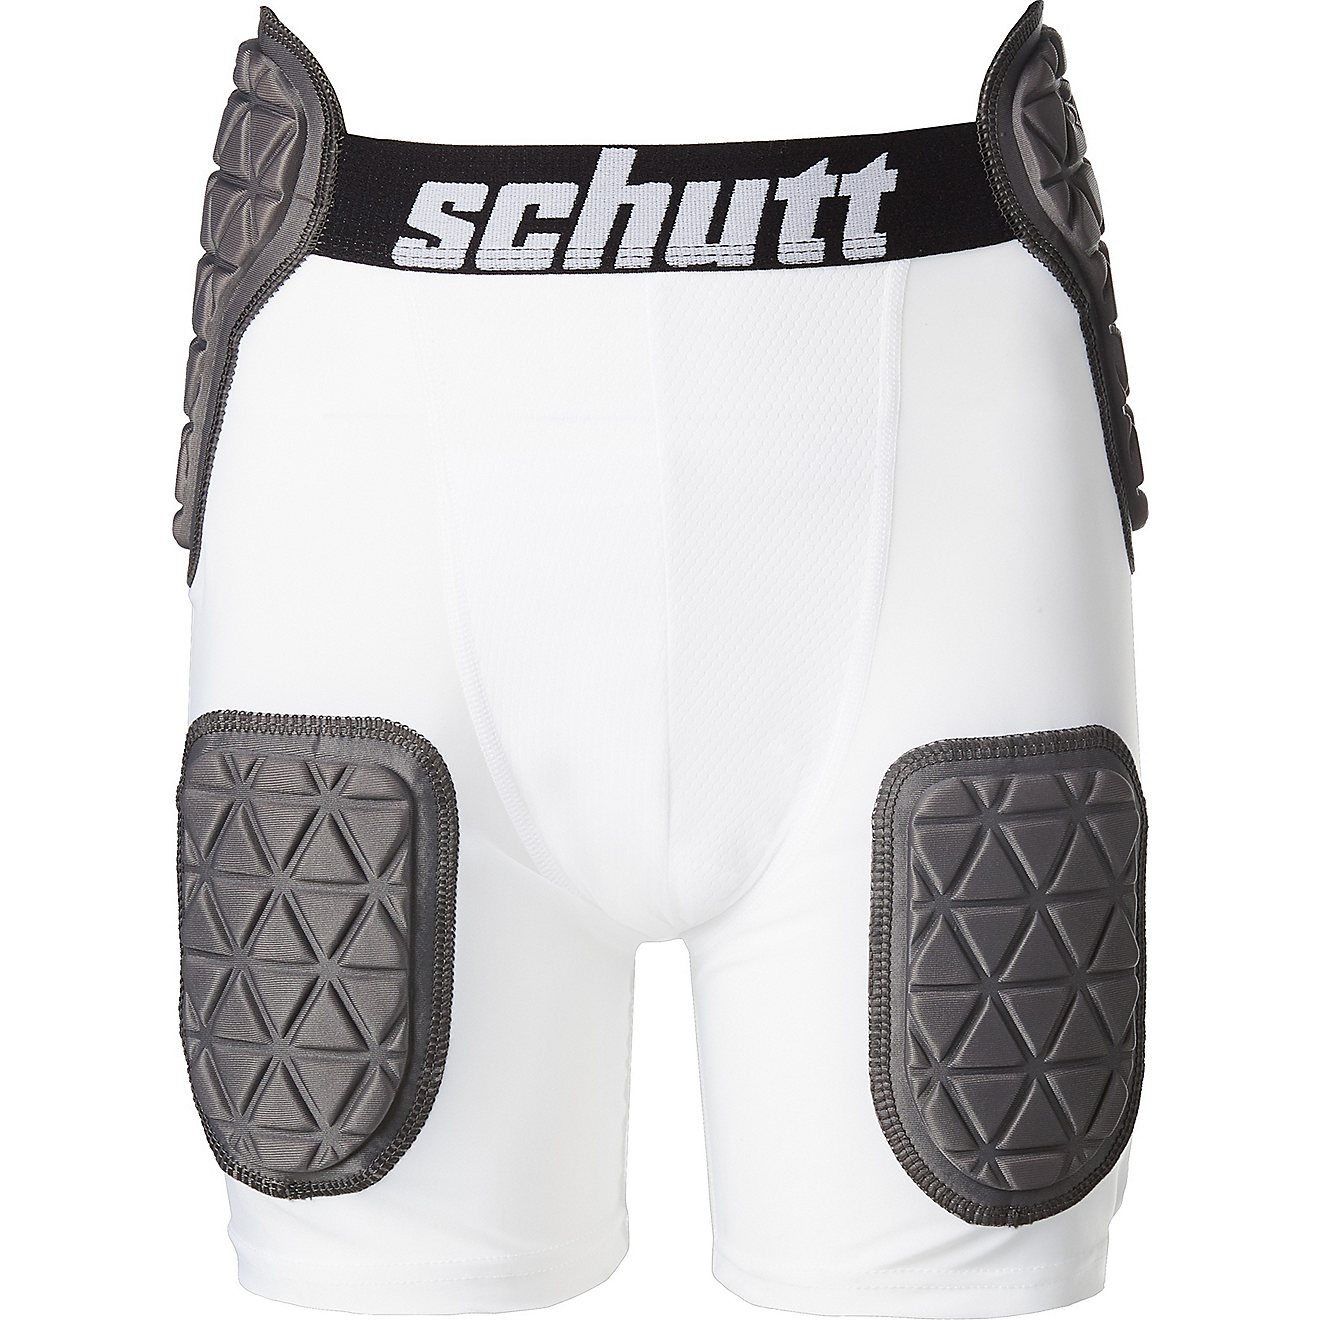 Schutt 8457470201 Varsity 2XL WH/GY Protech Tri All-In-One Football Girdle-NEW 